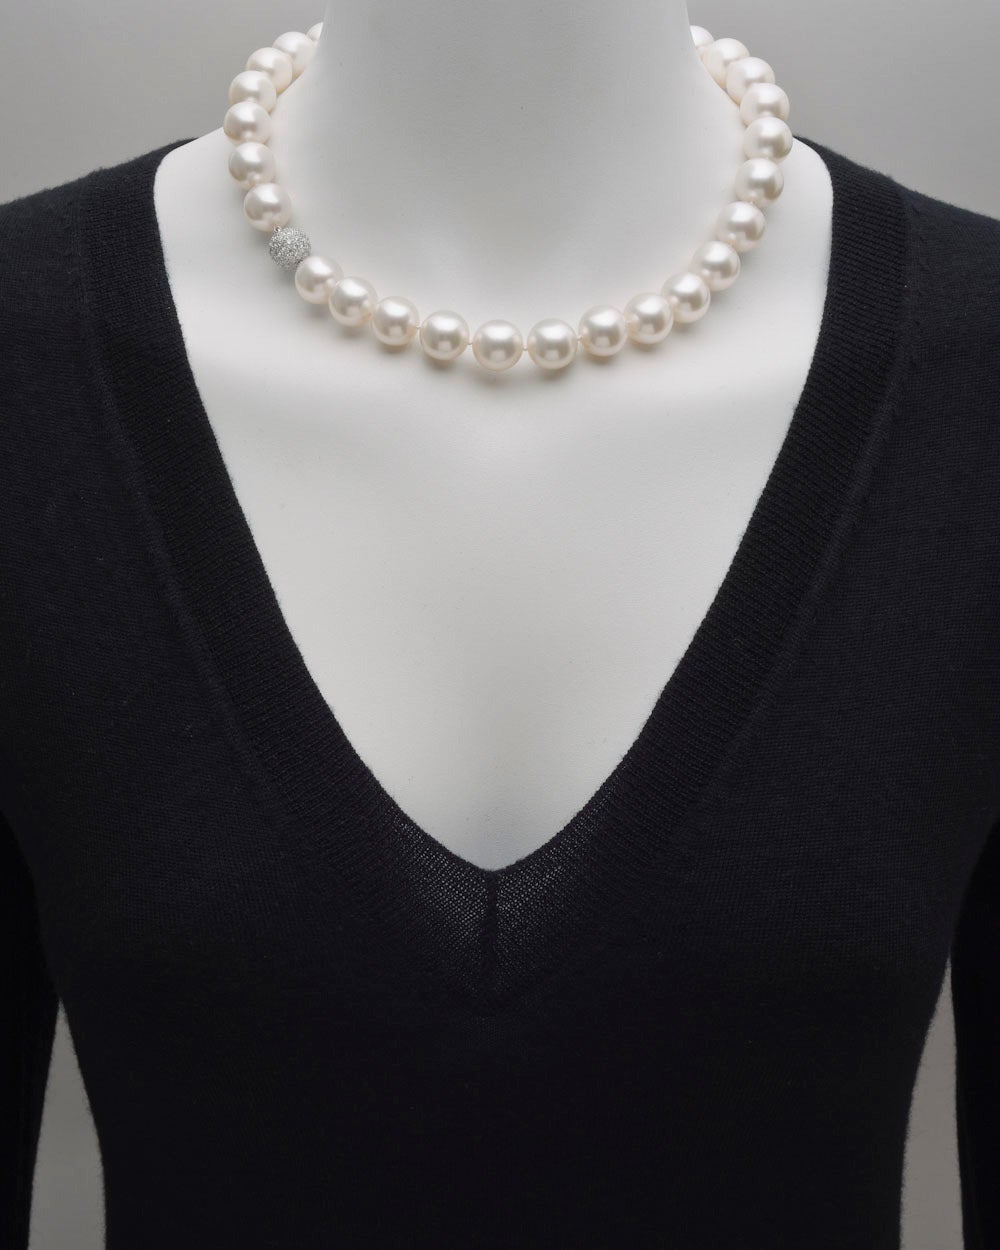 South Sea pearl necklace, composed of 27 South Sea cultured pearls, ranging from 13 to 14mm in diameter, strung on a silk cord, with a pave round-cut diamond ball clasp in platinum measuring approximately 11.4mm in diameter. Diamonds weighing